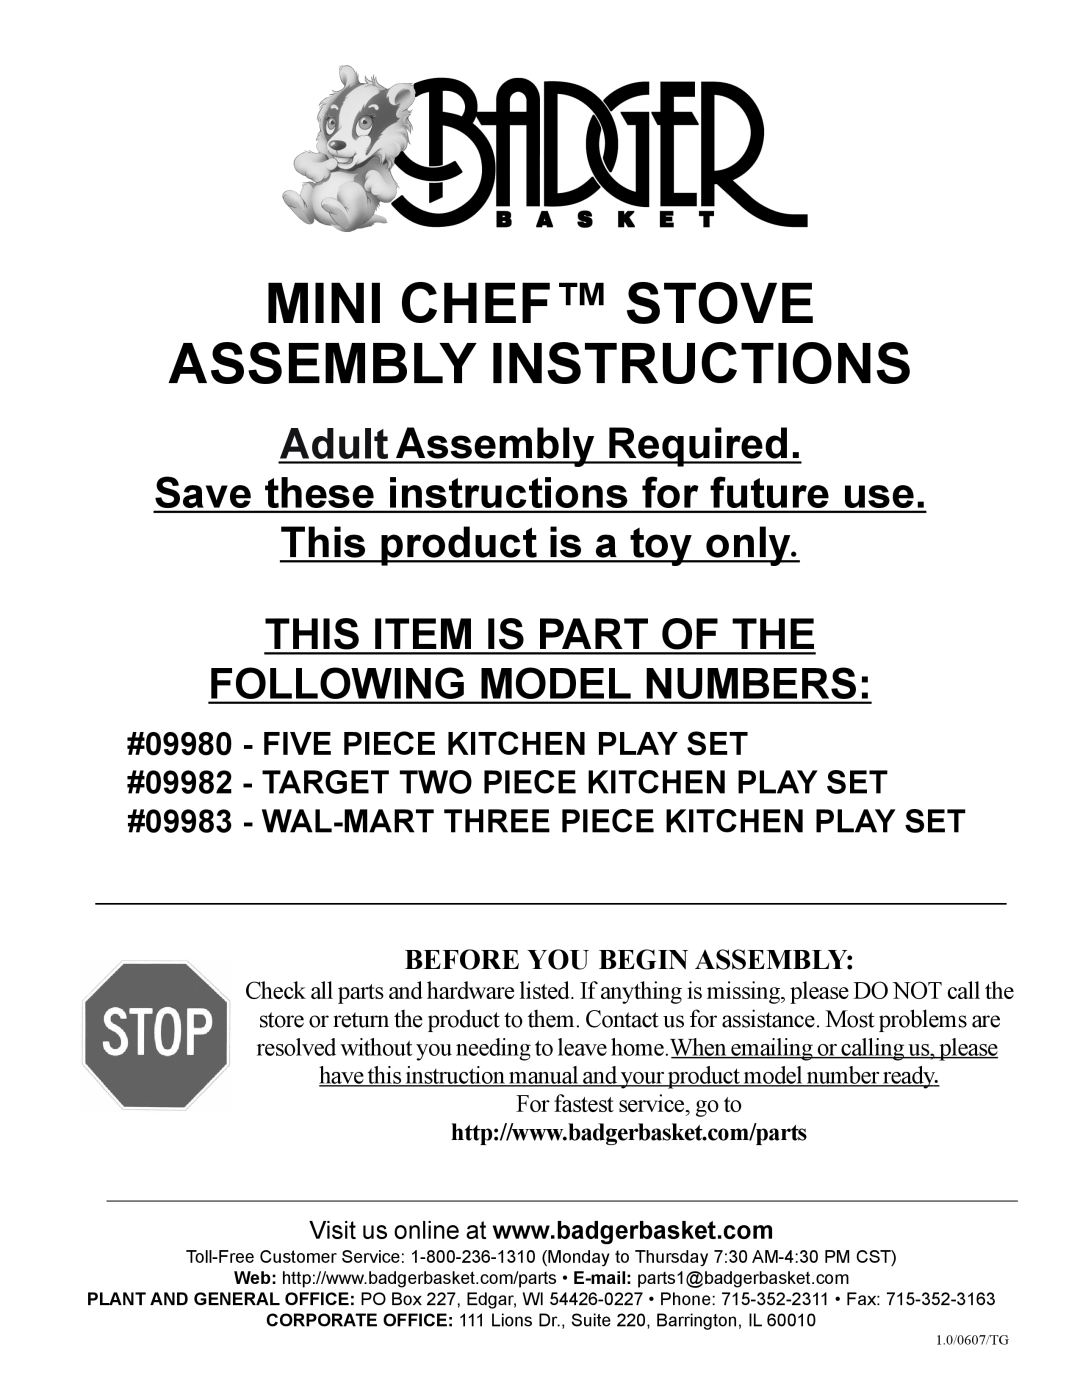 Badger Basket 09982, 09983 instruction manual Mini Chef Stove Assembly Instructions, Adult Assembly Required 